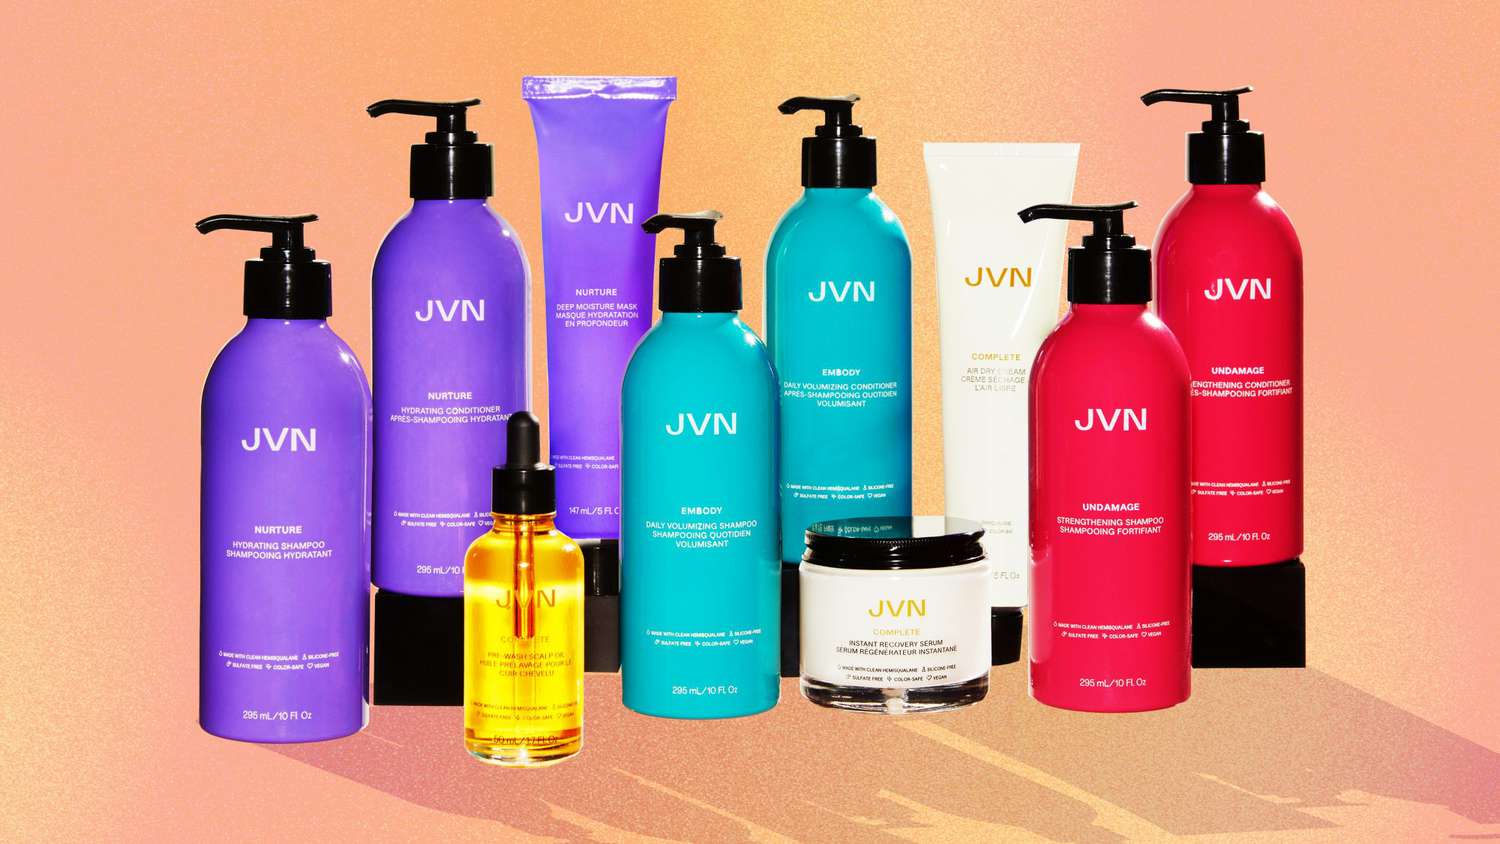 Jonathan-Van-Ness-Is-About-to-Launch-a-Hair-Care-Line-Products